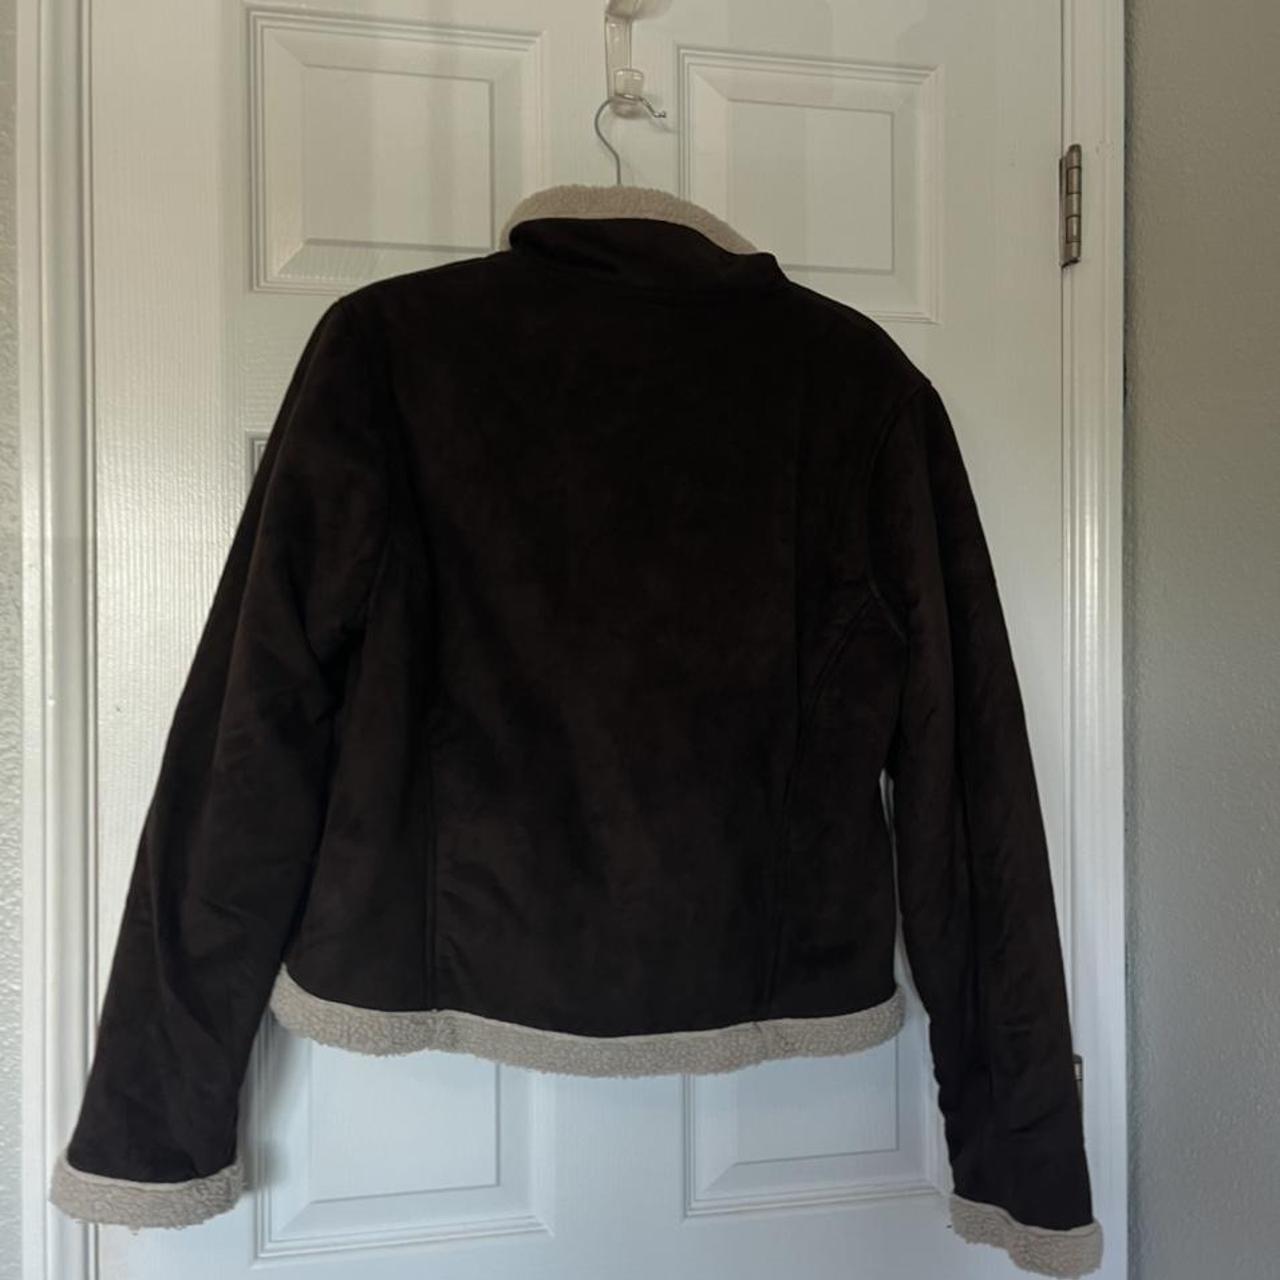 Product Image 4 - Trespass brown jacket!
Size L, fits